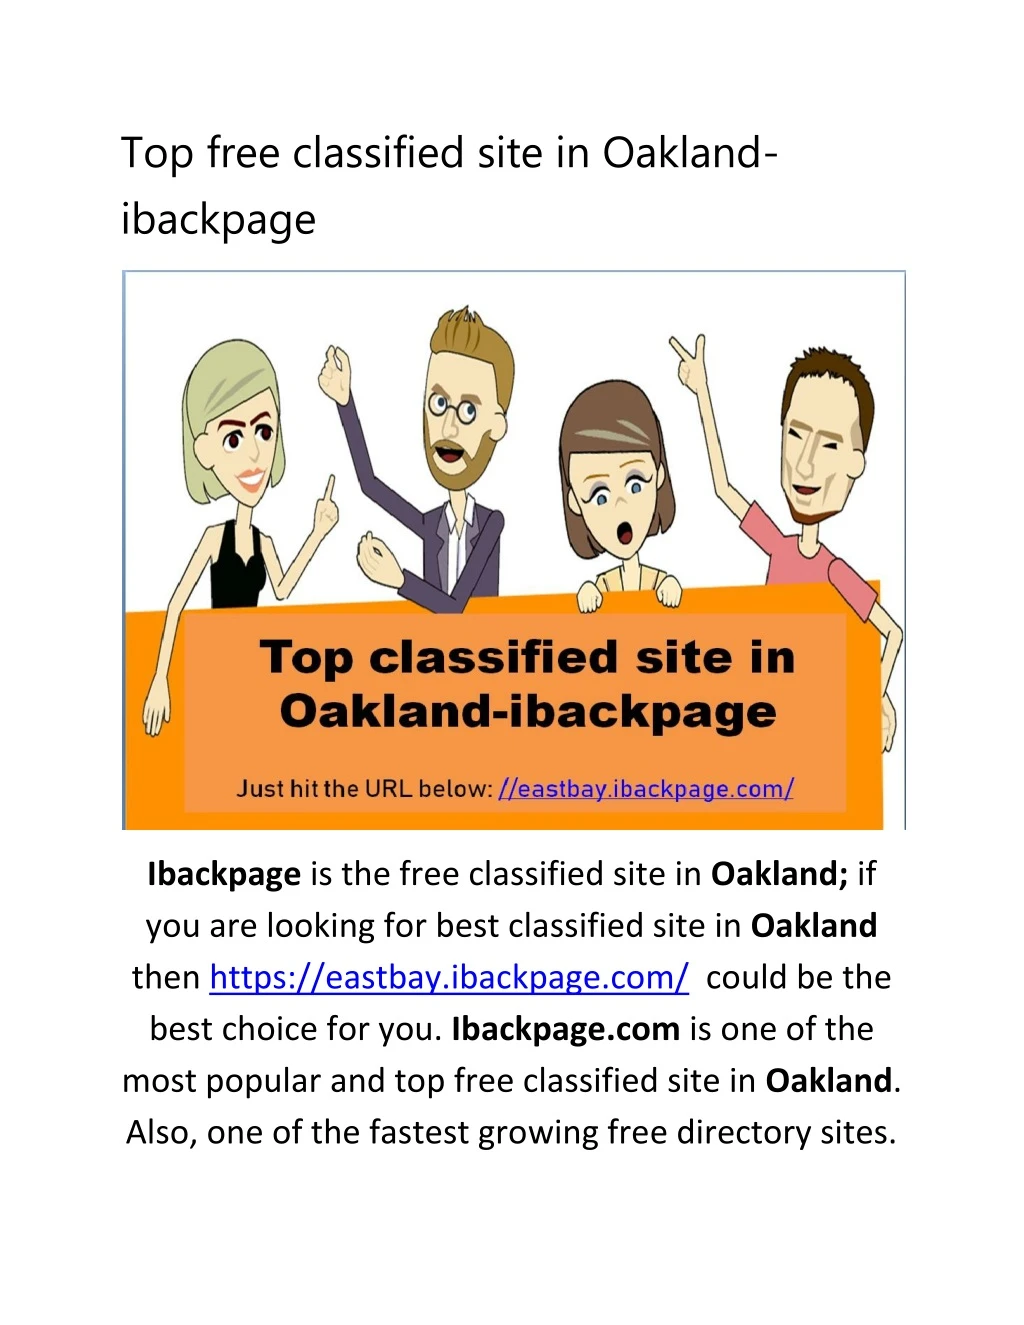 top free classified site in oakland ibackpage